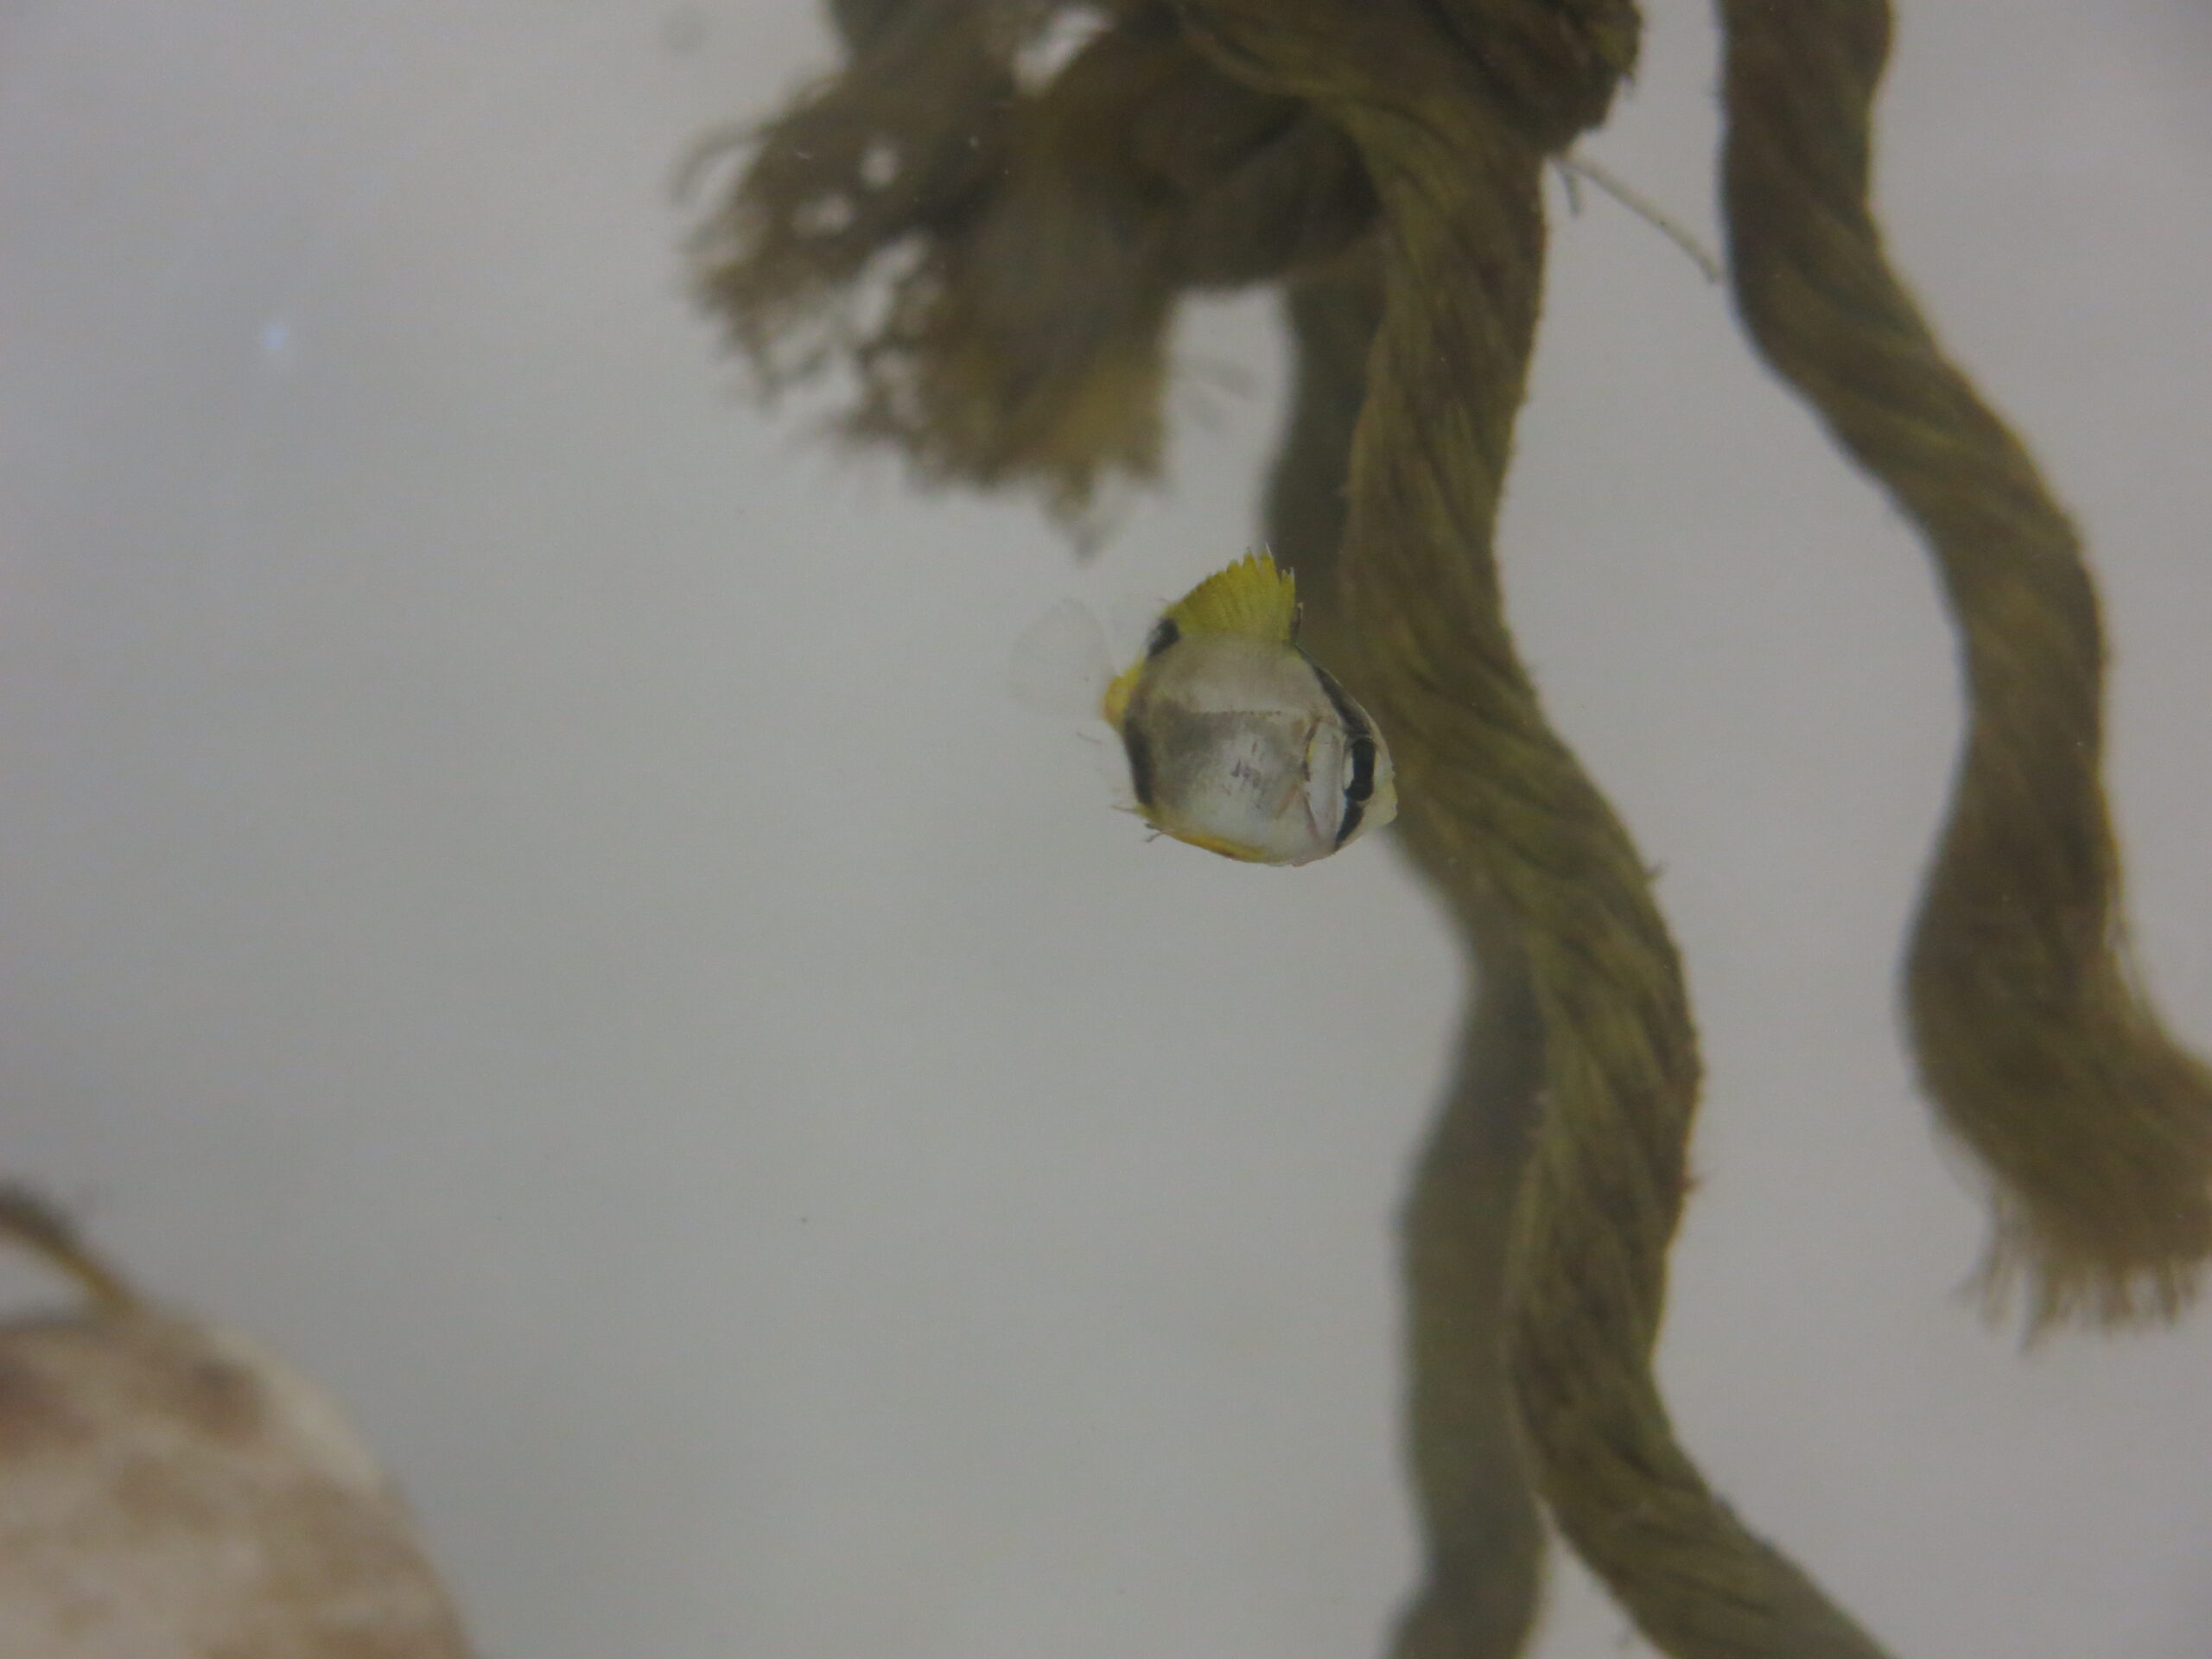 A tiny butterfly fish swims around rope in the tank